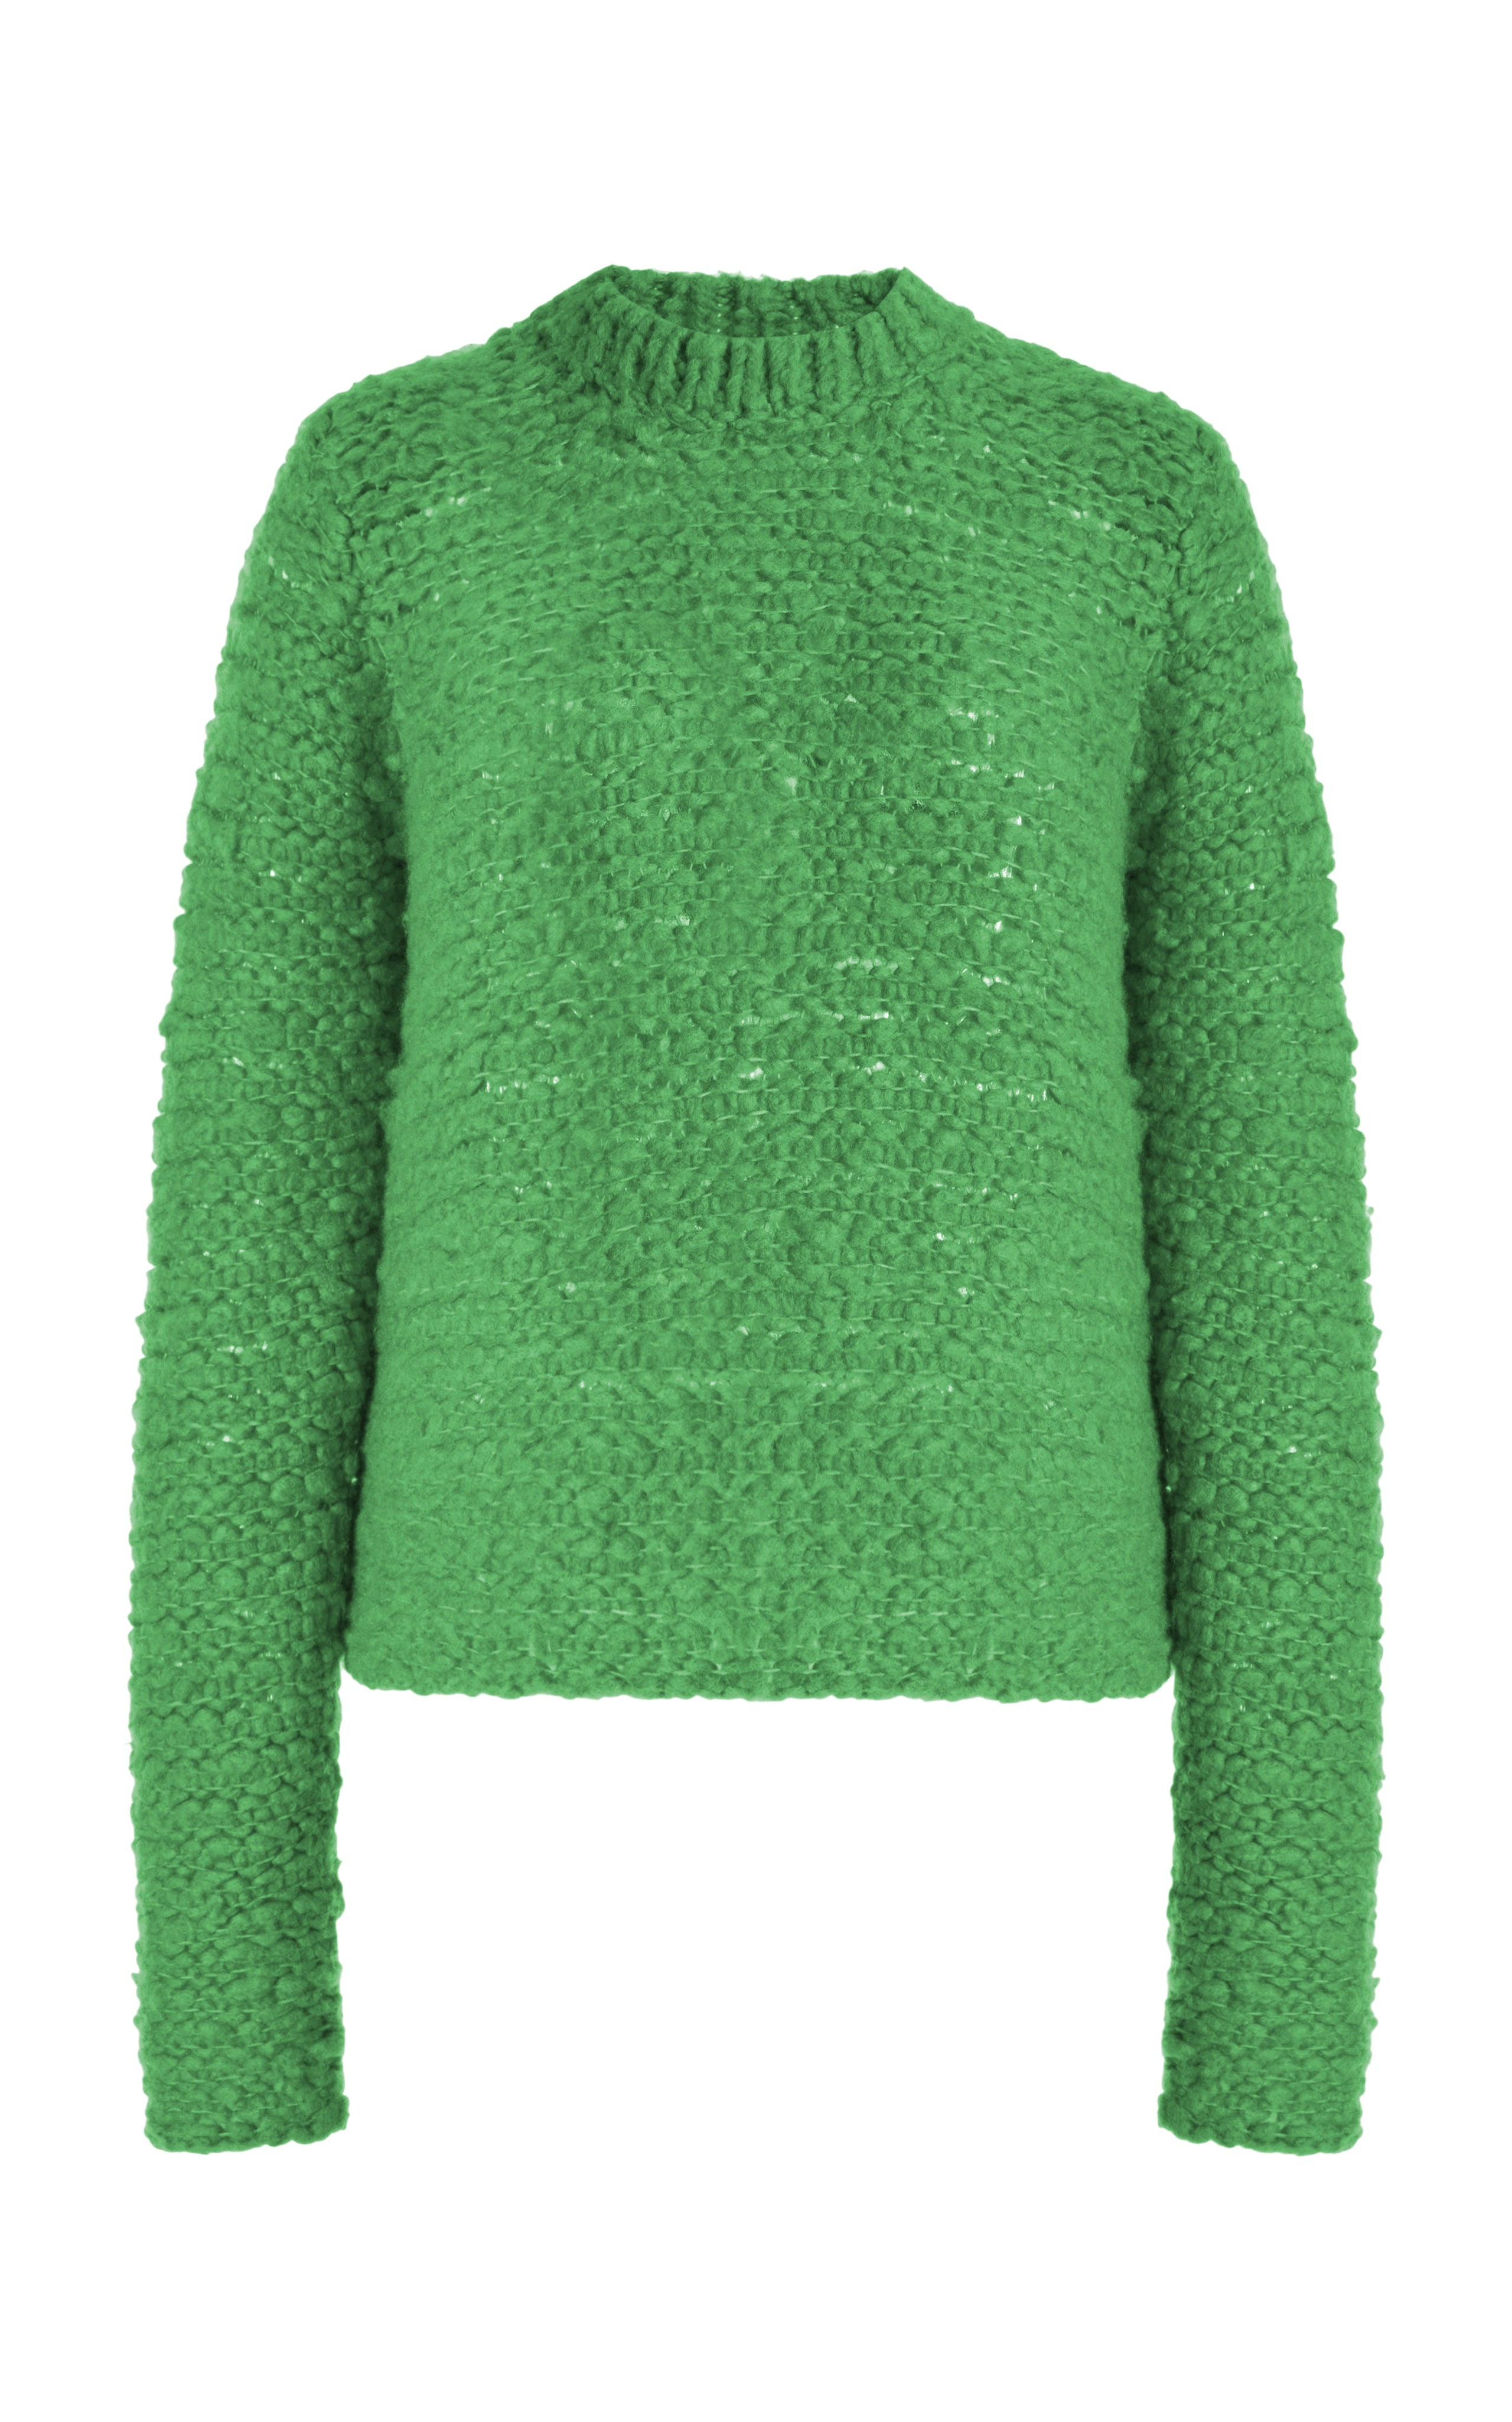 Durand Knit Sweater in Periodt Green Welfat Cashmere - 1